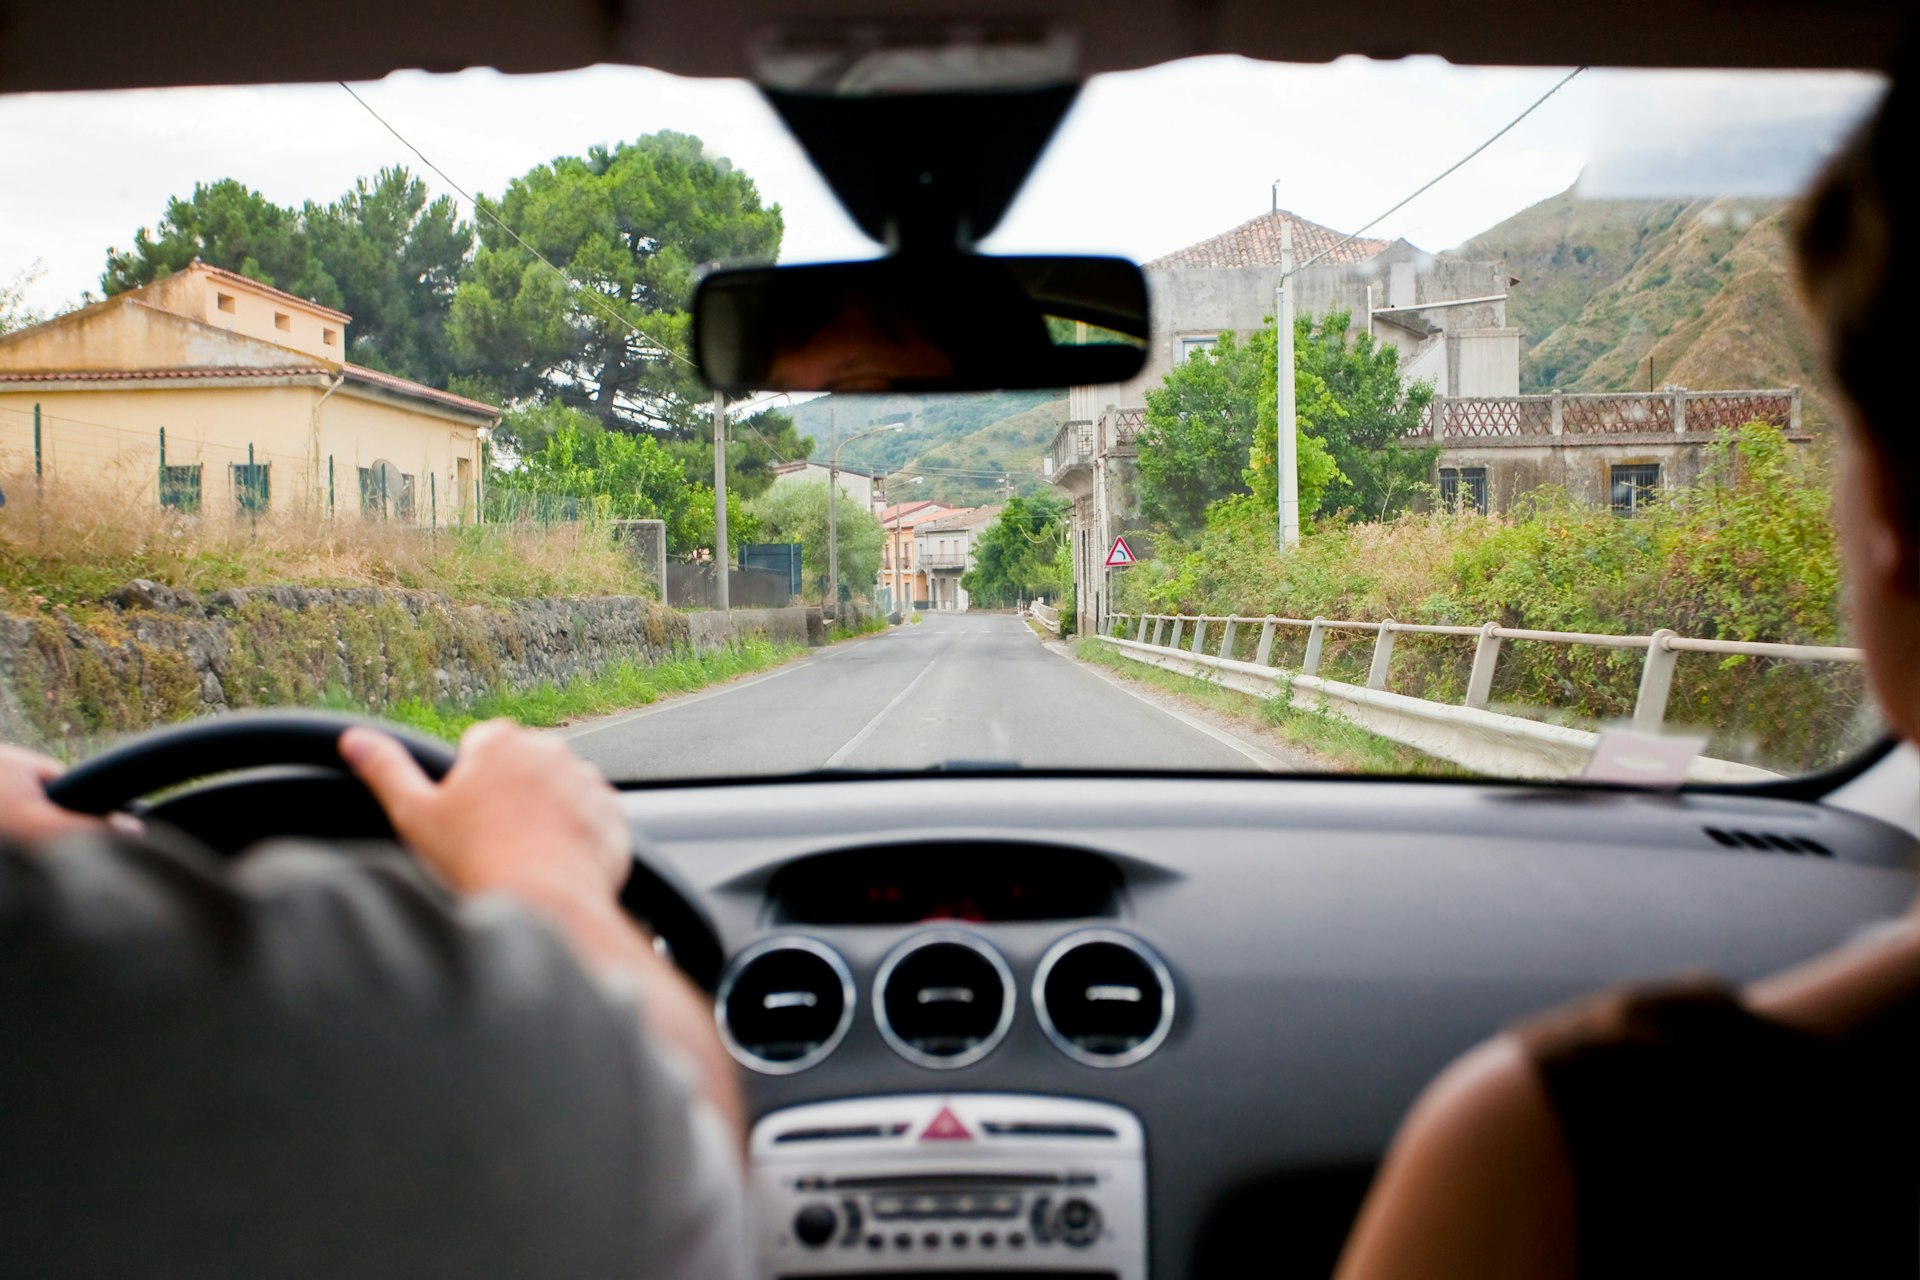 A man and woman sit in a car while driving in Sicily. The camera is looking out the front windshield to reveal a historic town ahead